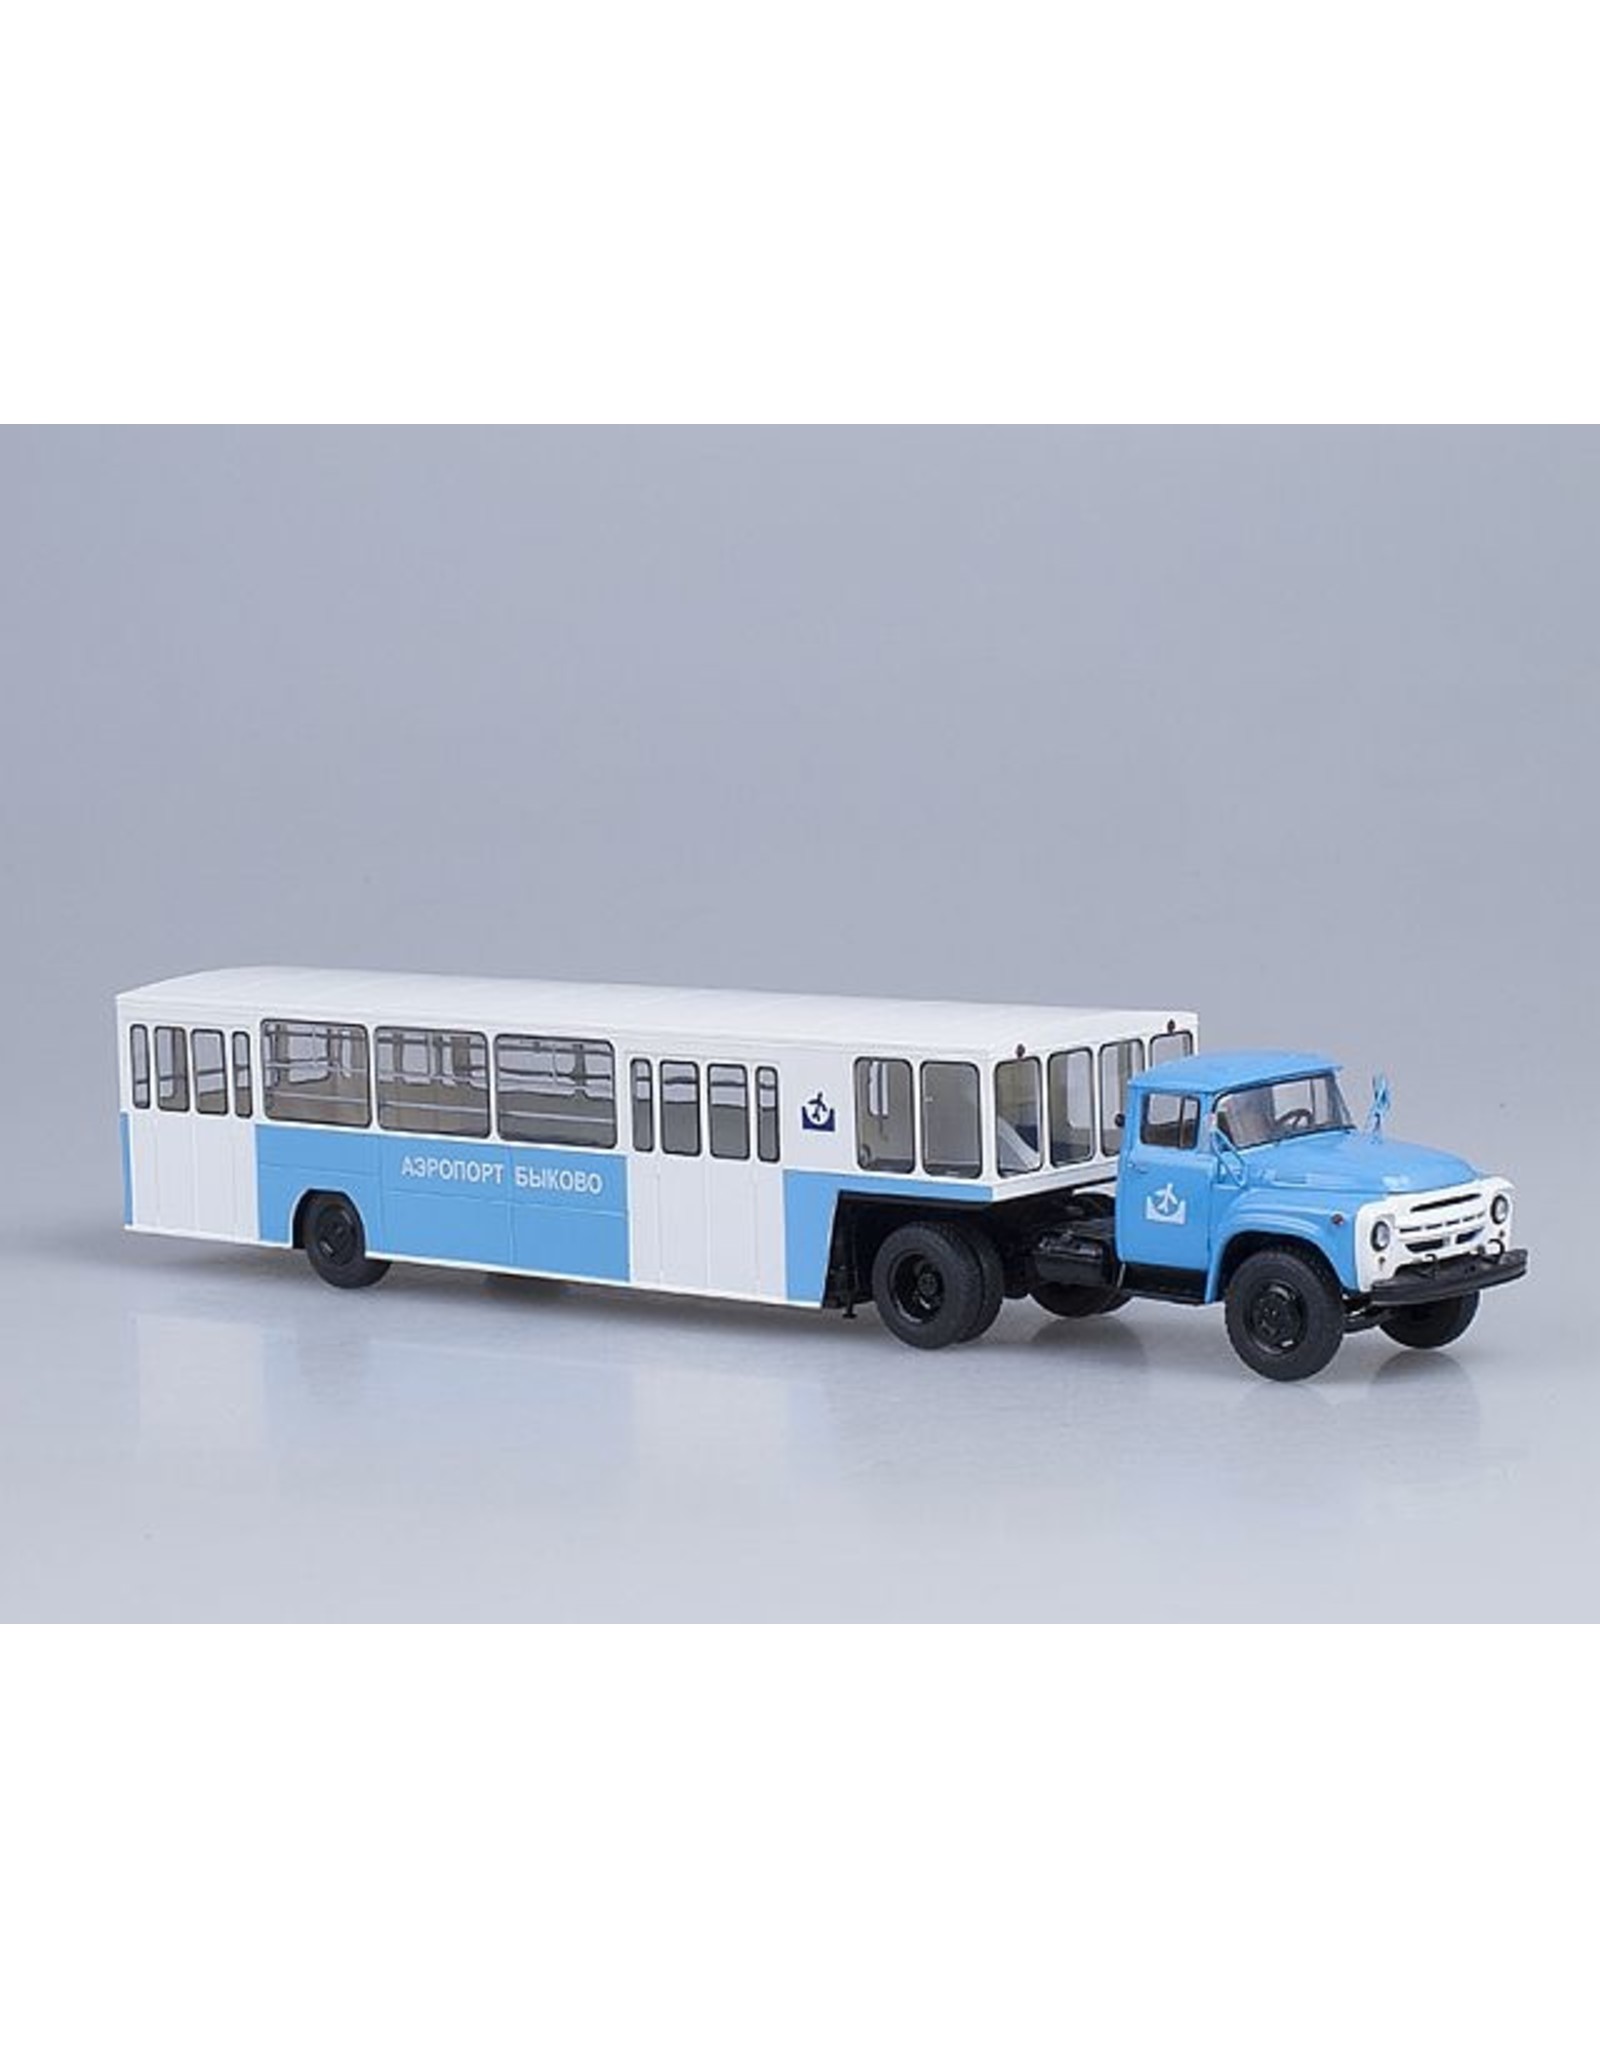 ZiL ZiL-130V1 WITH AIRPORT BUS SEMITRAILER APPA-4 Bycavo